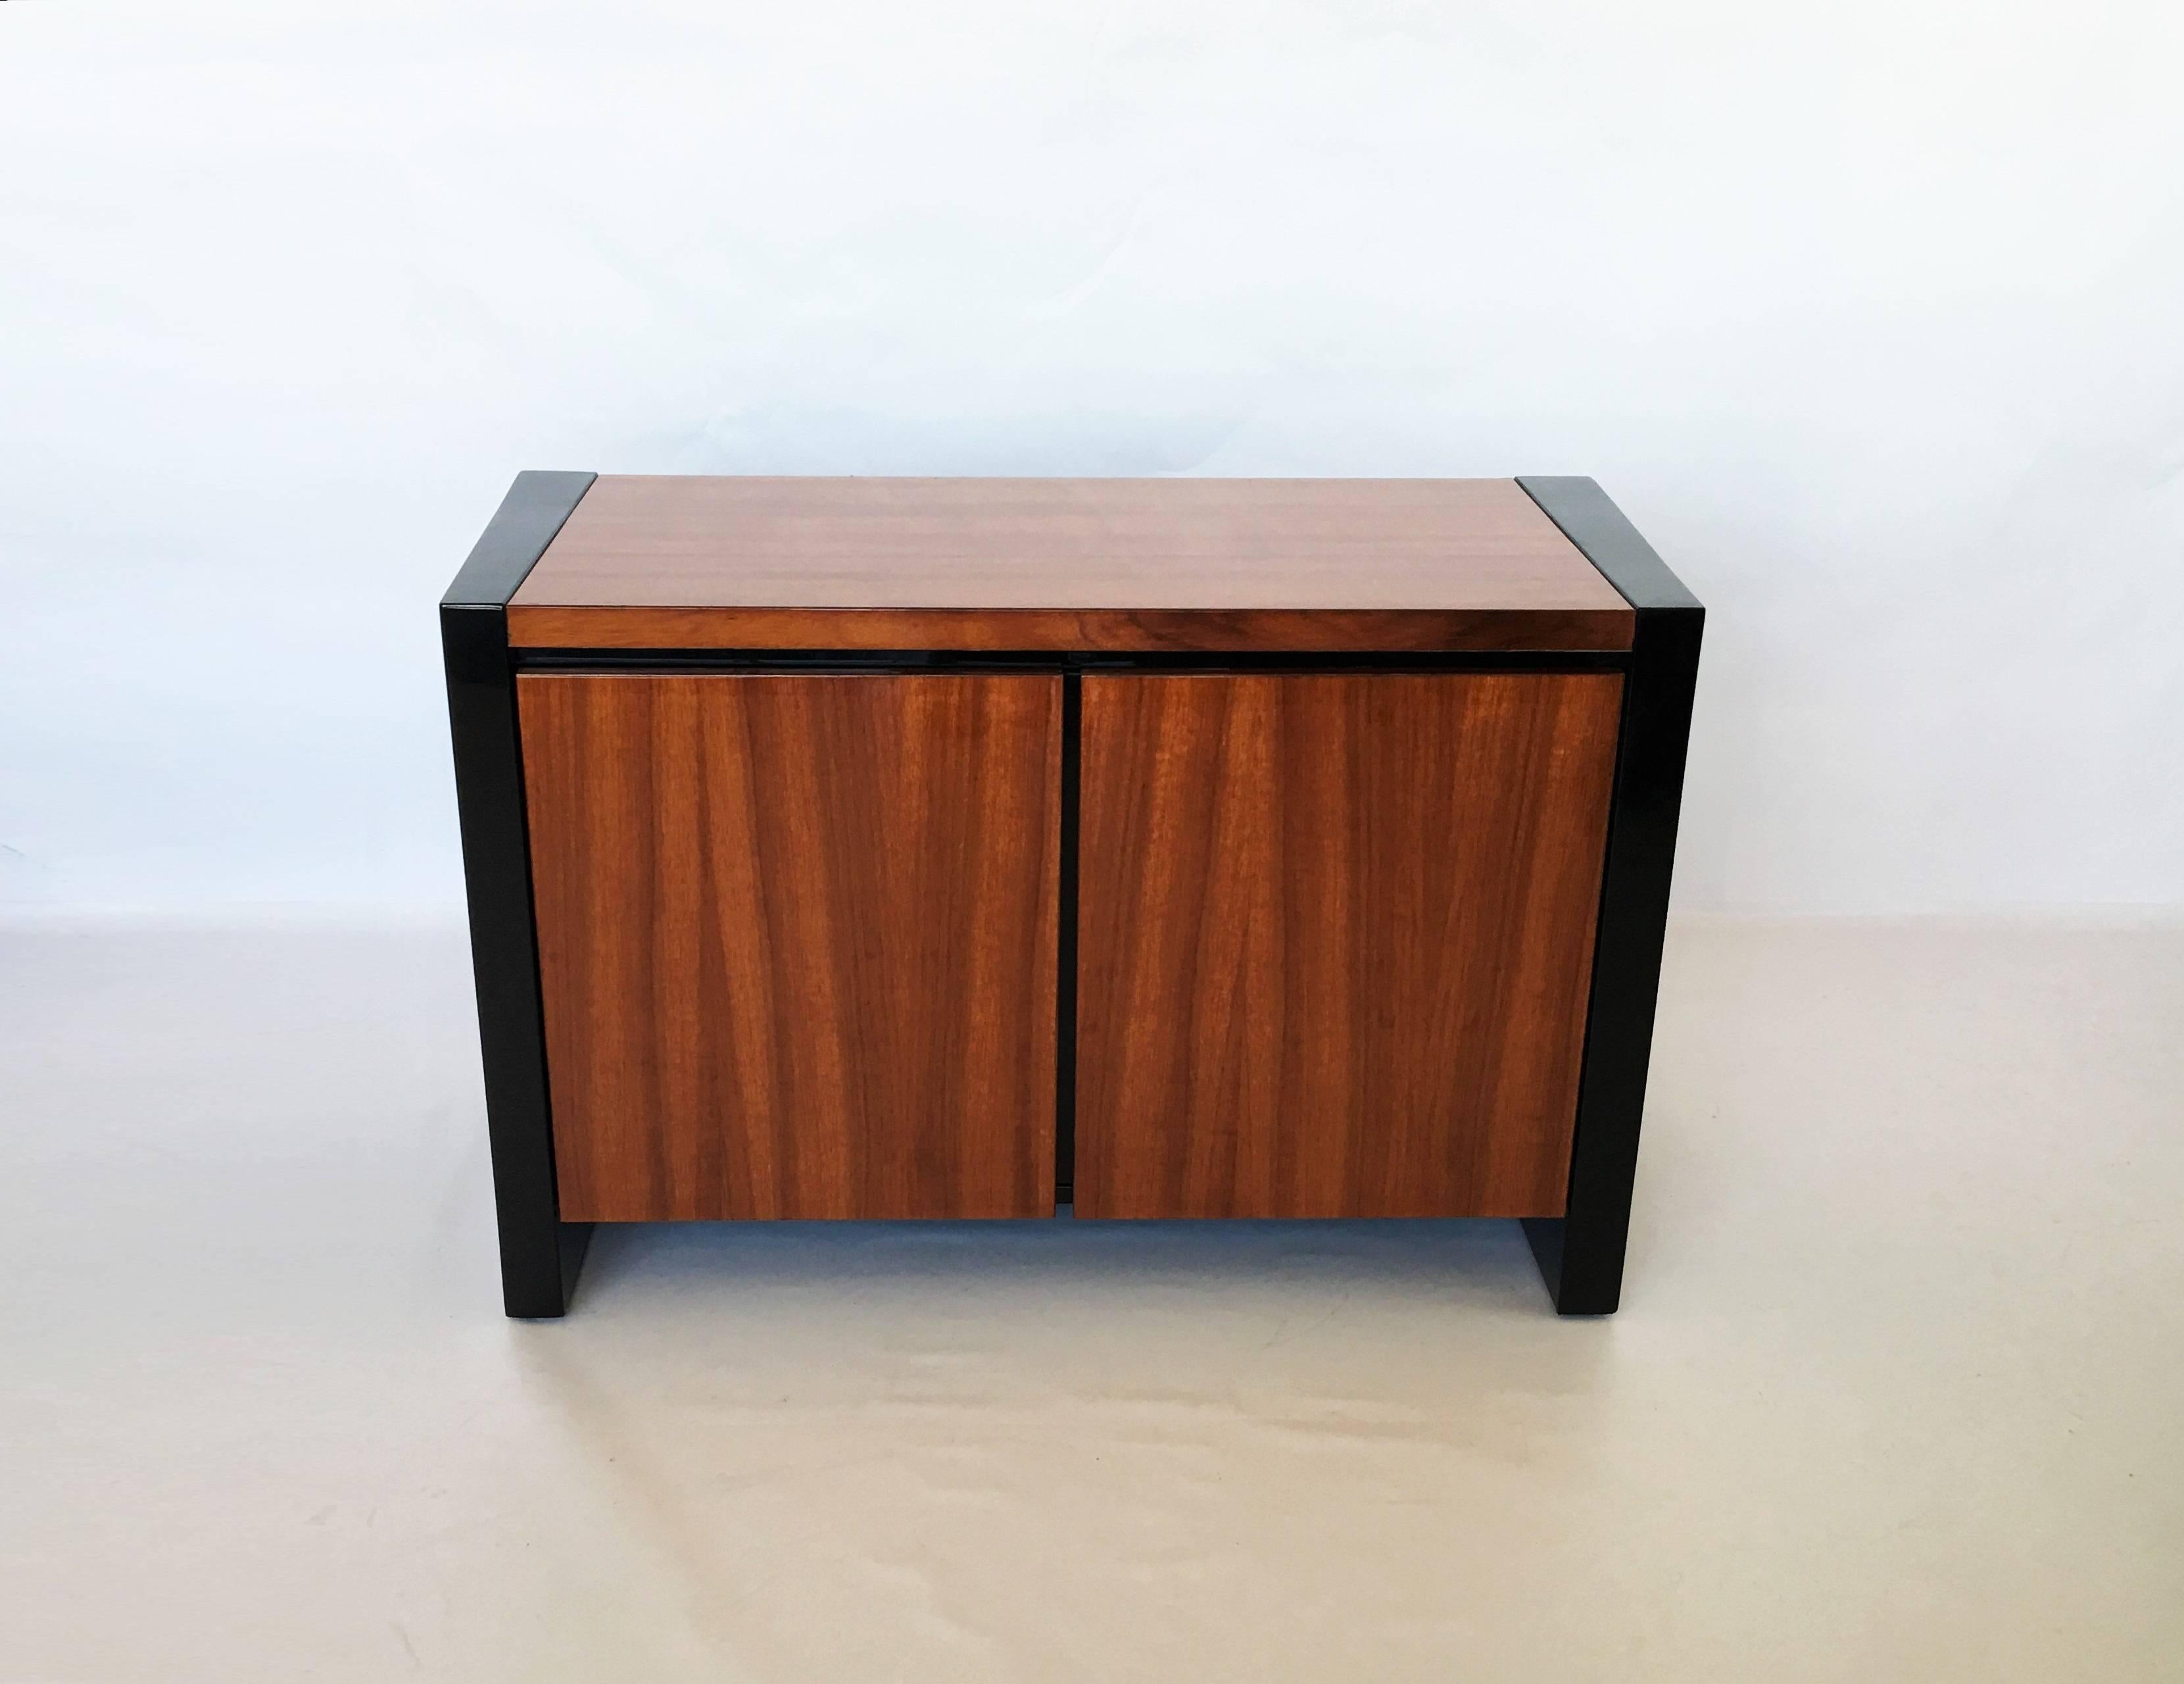 Late 20th Century Pair of Black Lacquer and Koa Wood Nightstands by Henredon For Sale